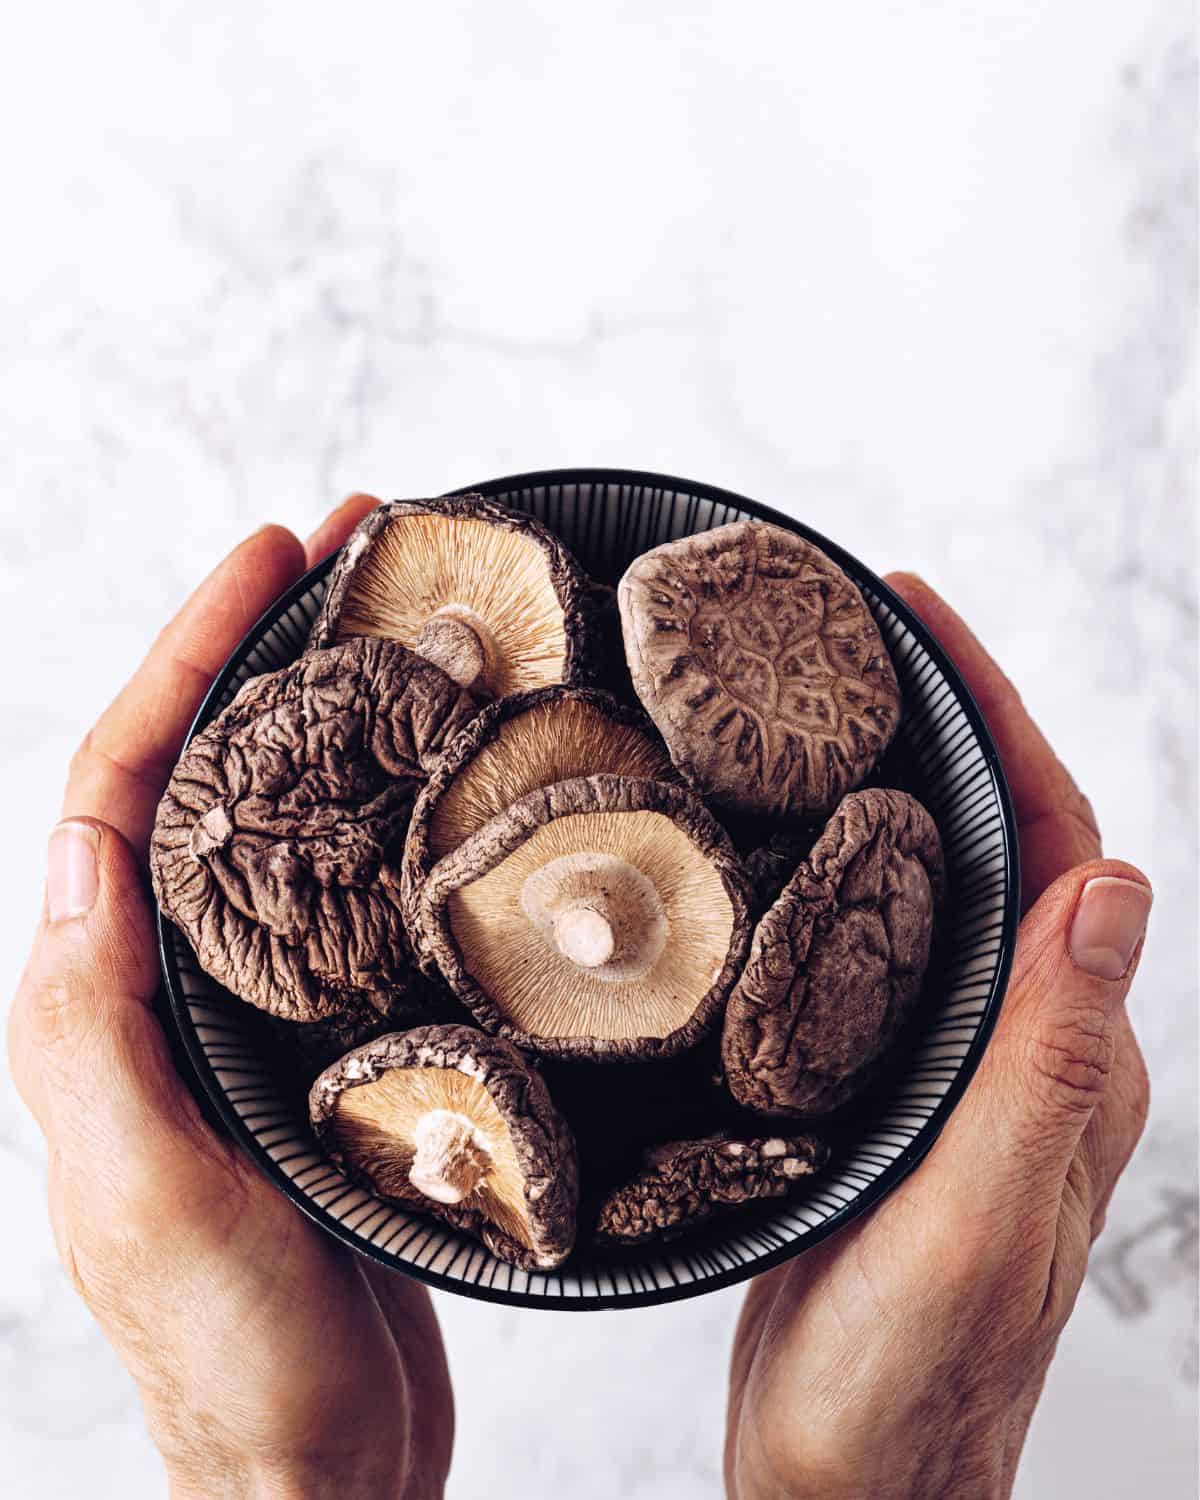 Shiitake mushrooms in a bowl held by hands.